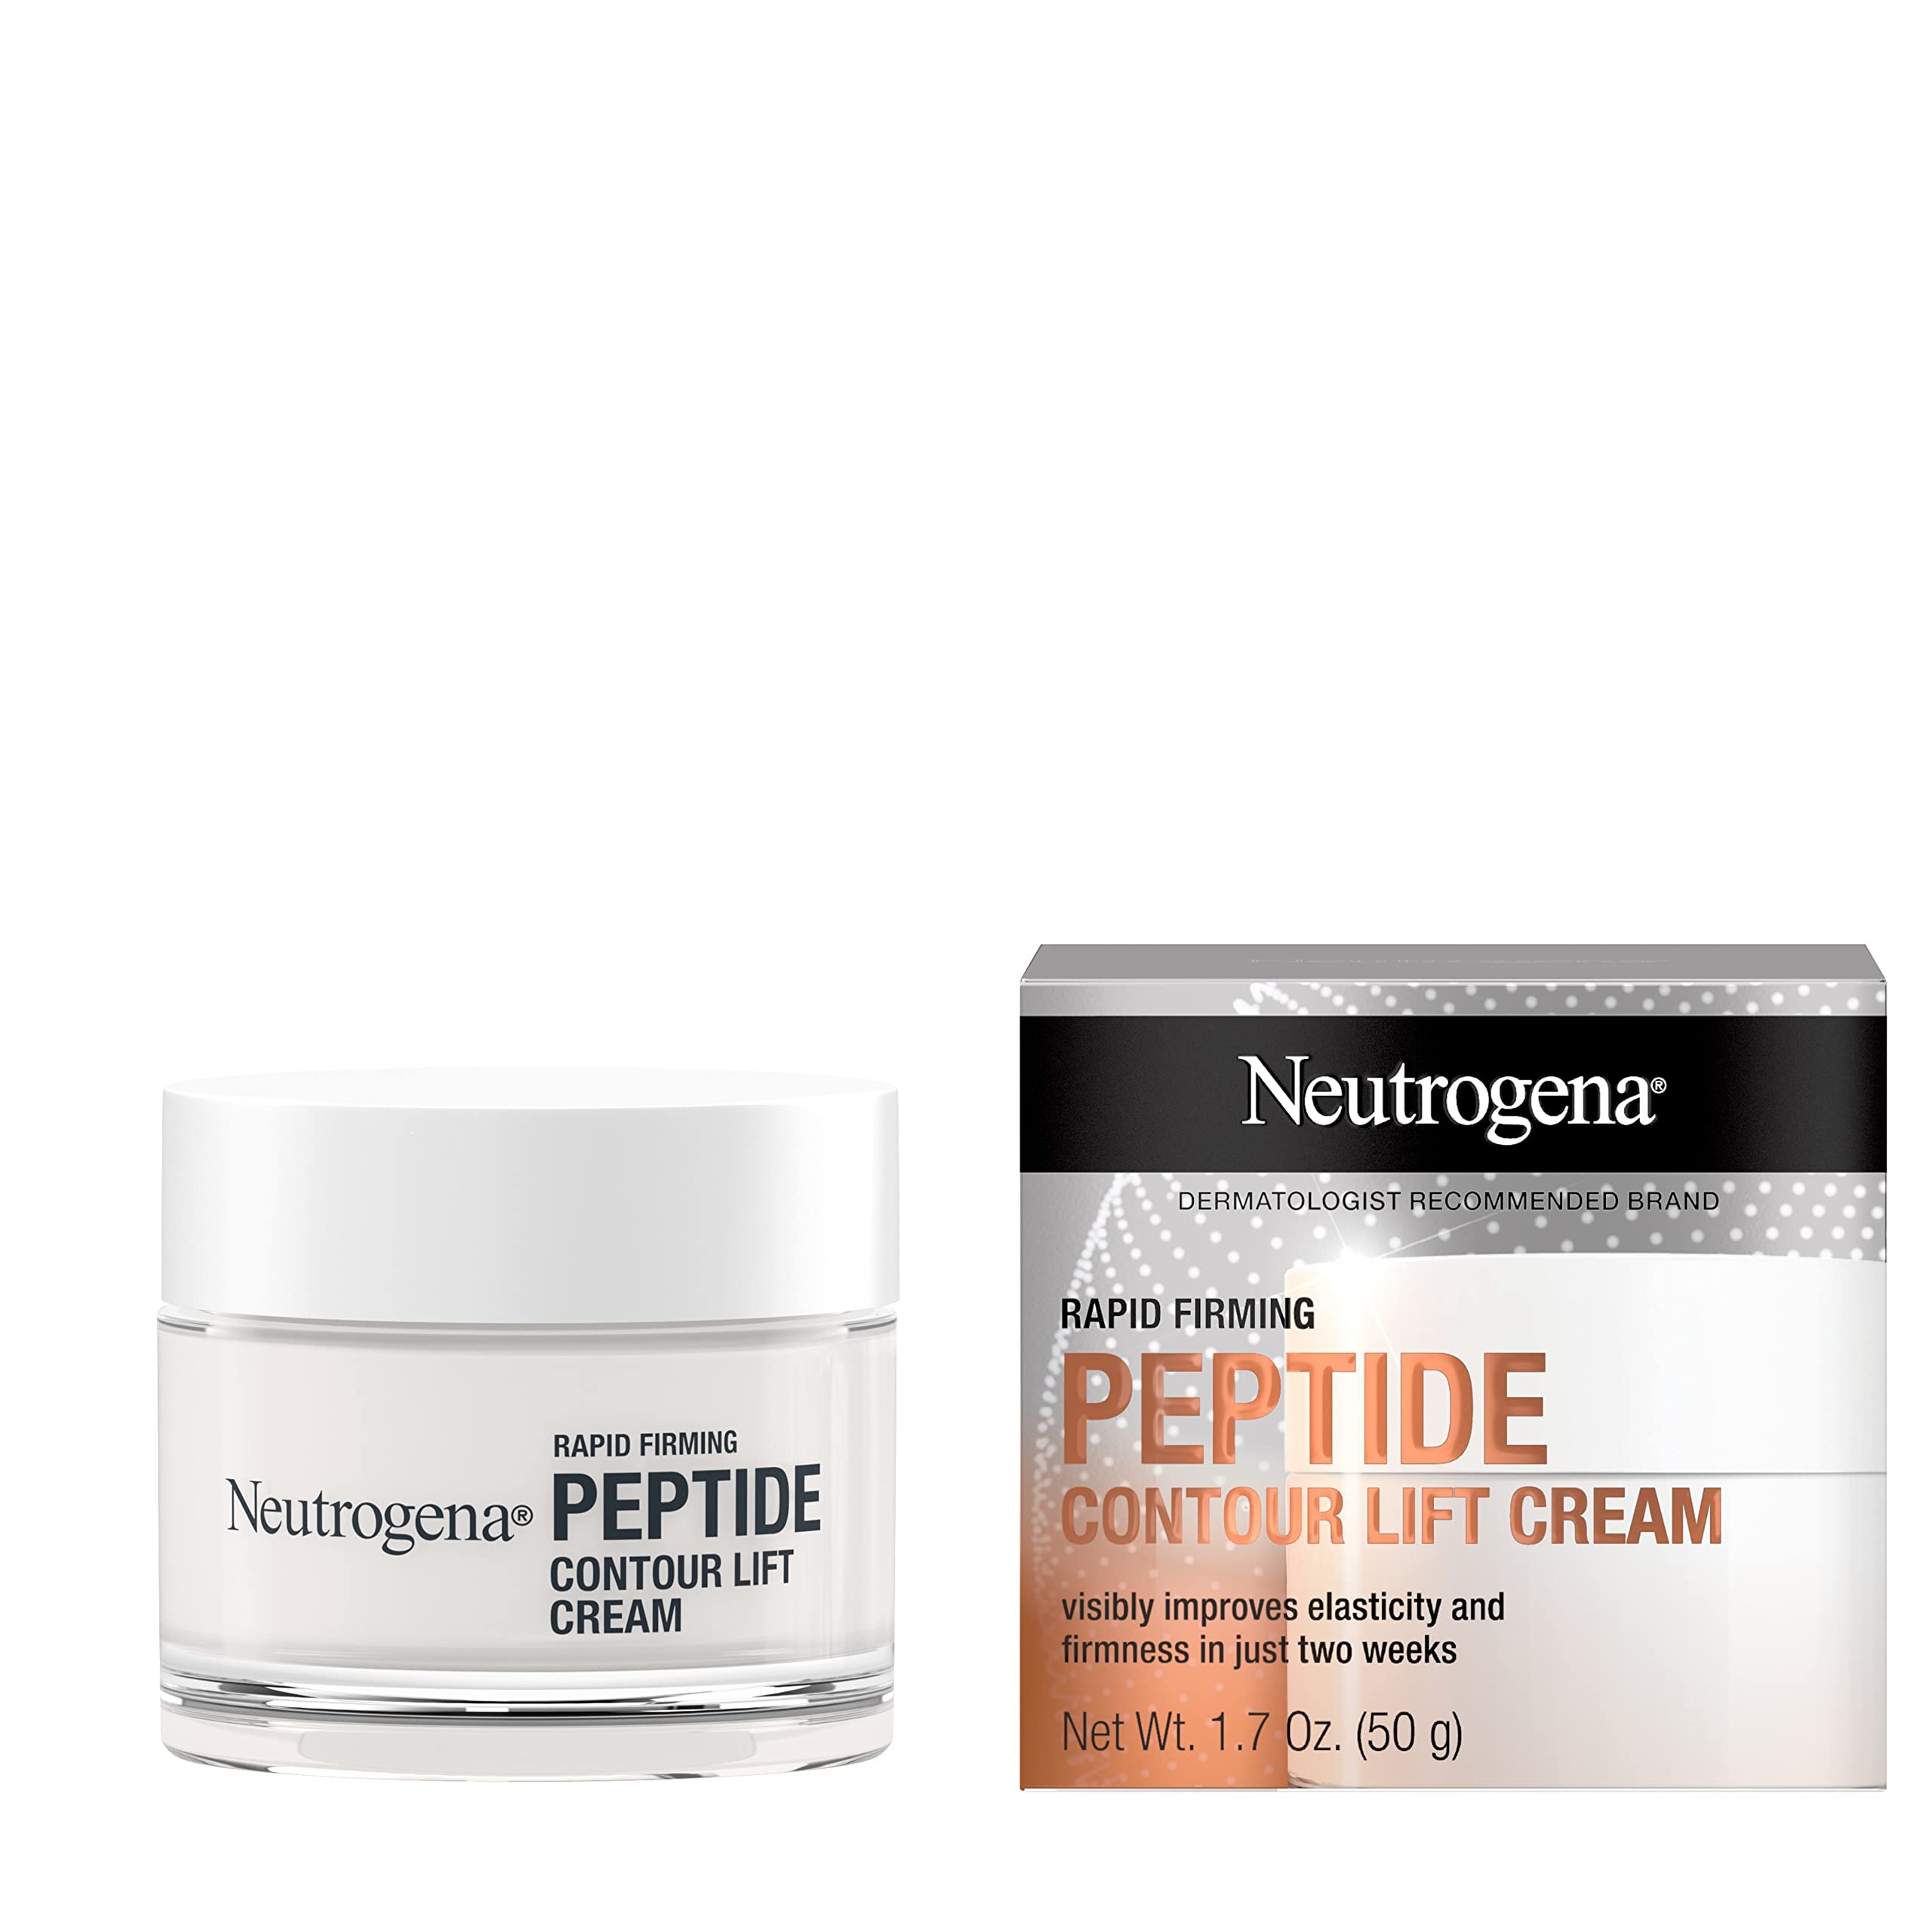 Neutrogena Rapid Firming Peptide Contour Lift Face Cream, Moisturizing Daily Facial Cream to visibly firm & lift skin plus smooth the look of wrinkles, Mineral Oil- & Dye-Free, 1.7 oz